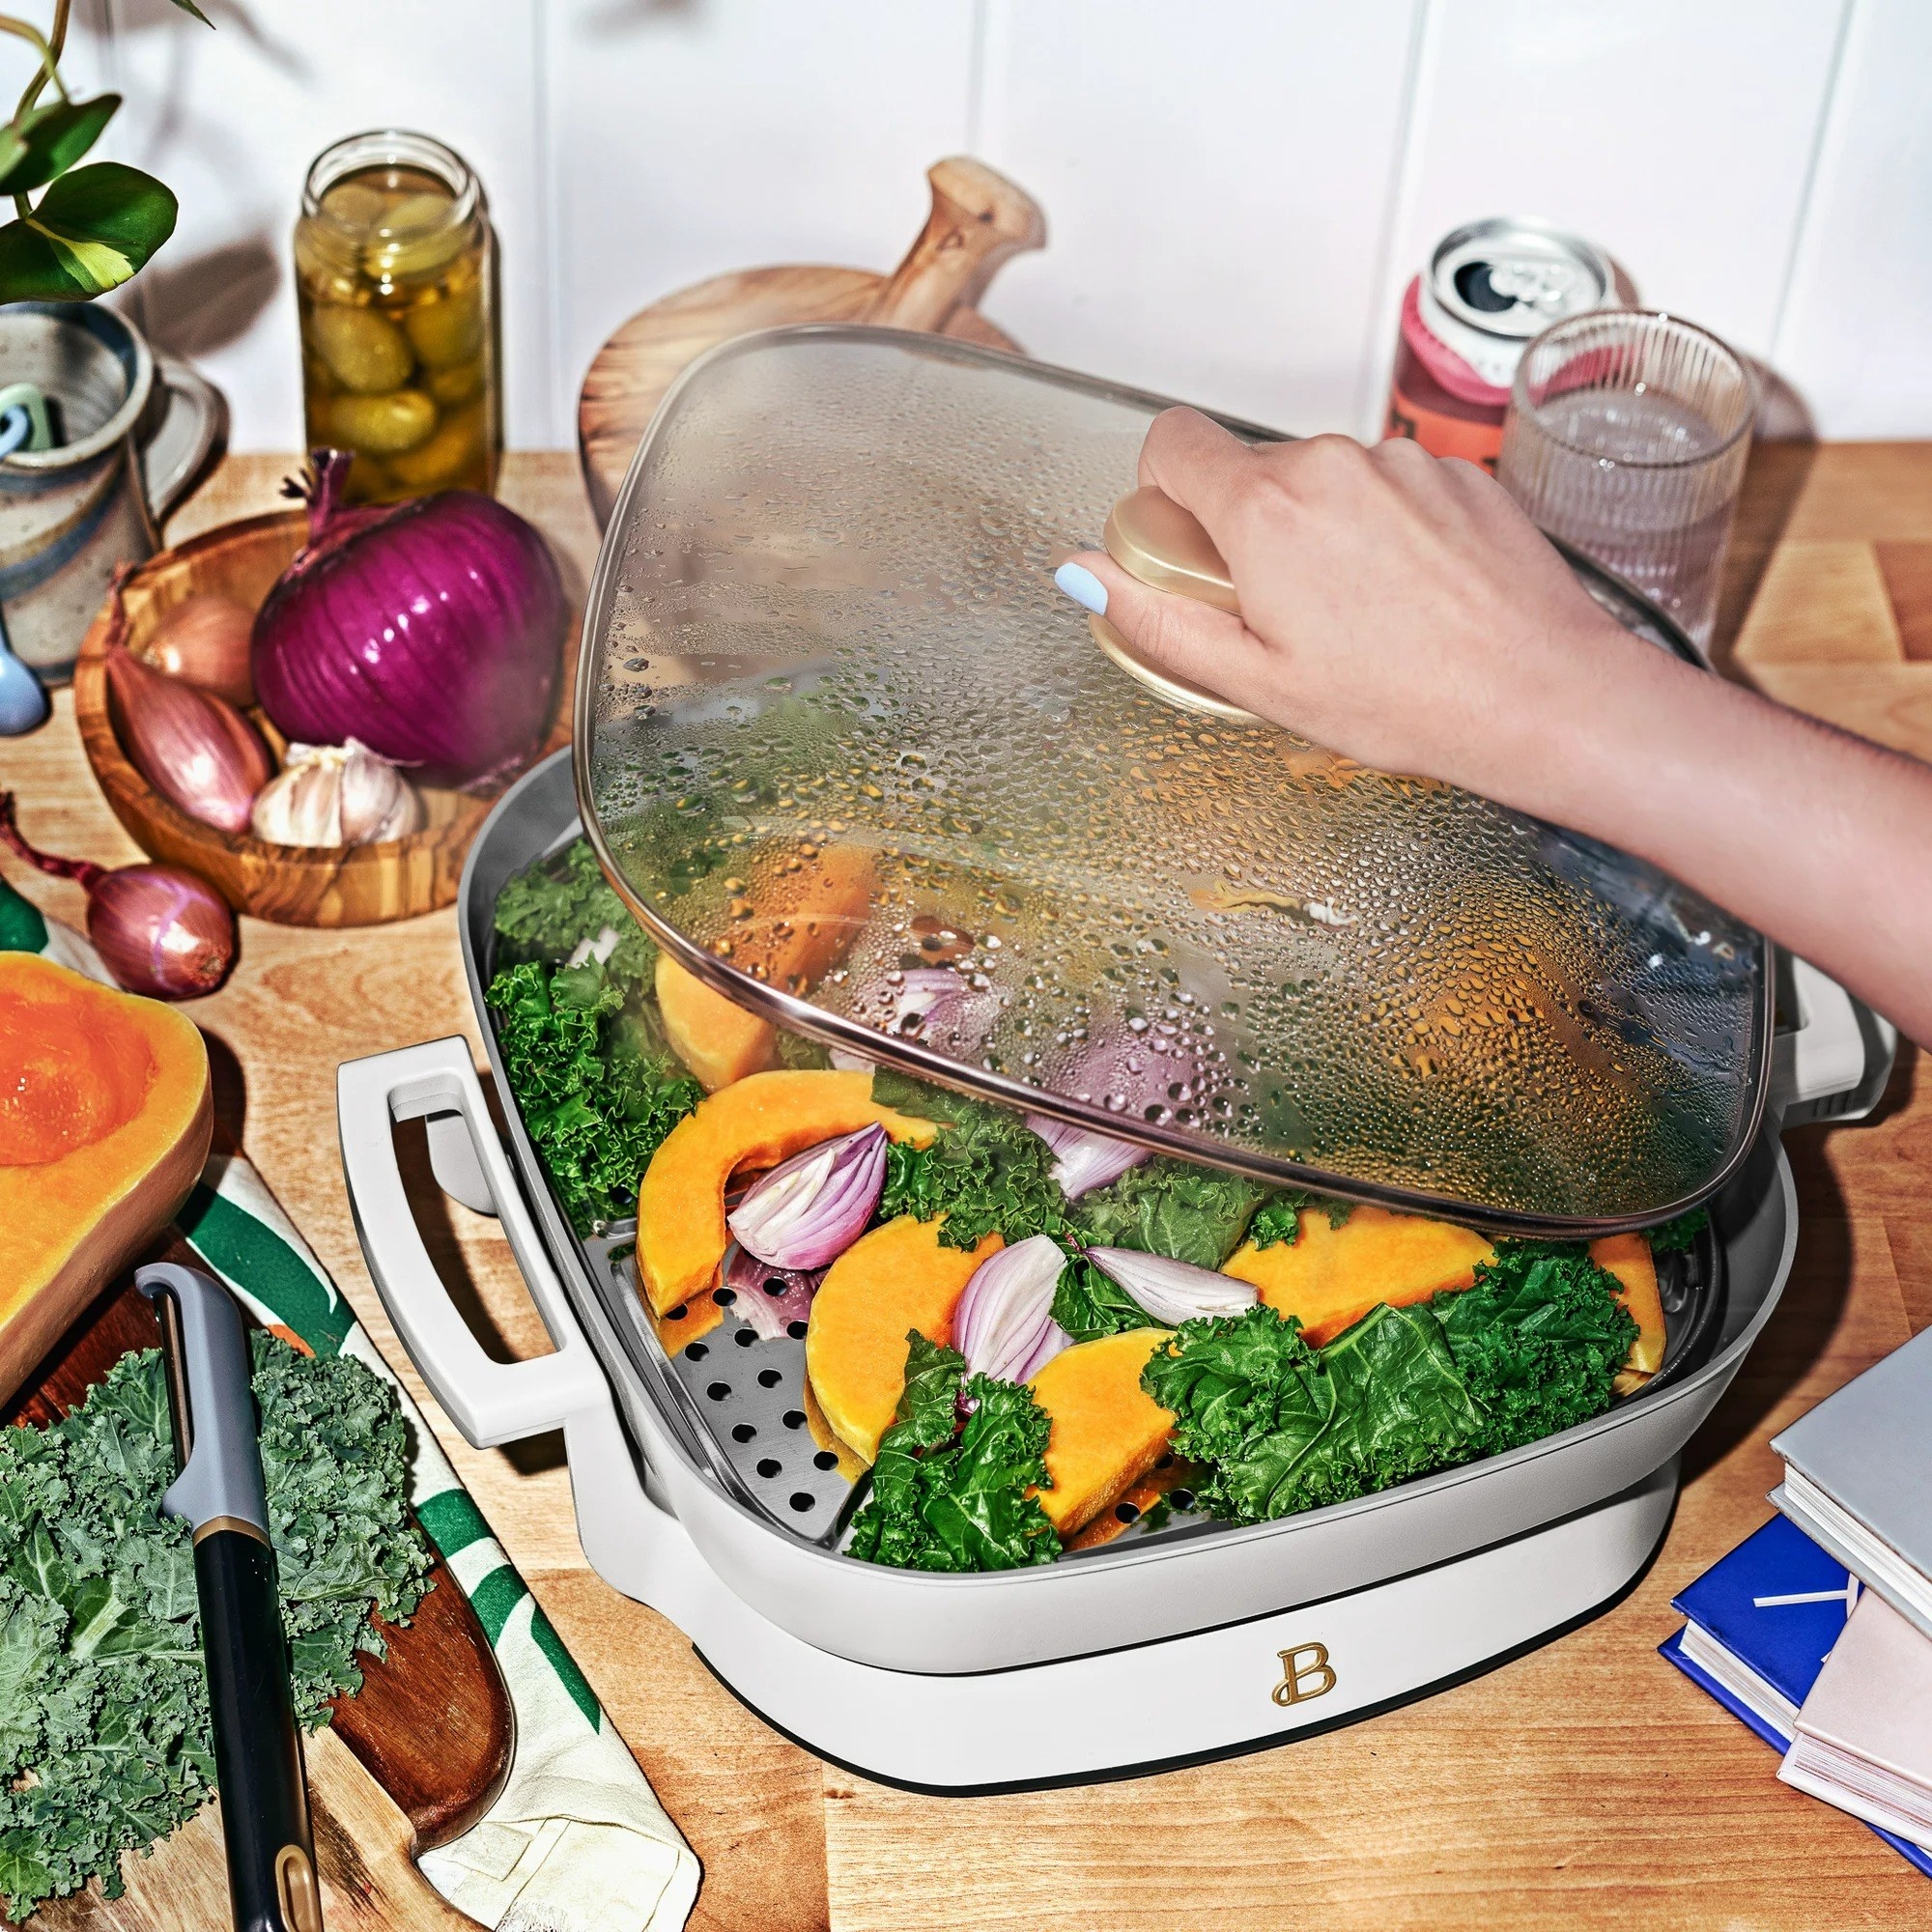 The skillet filled with food, as a person lifts the lid.